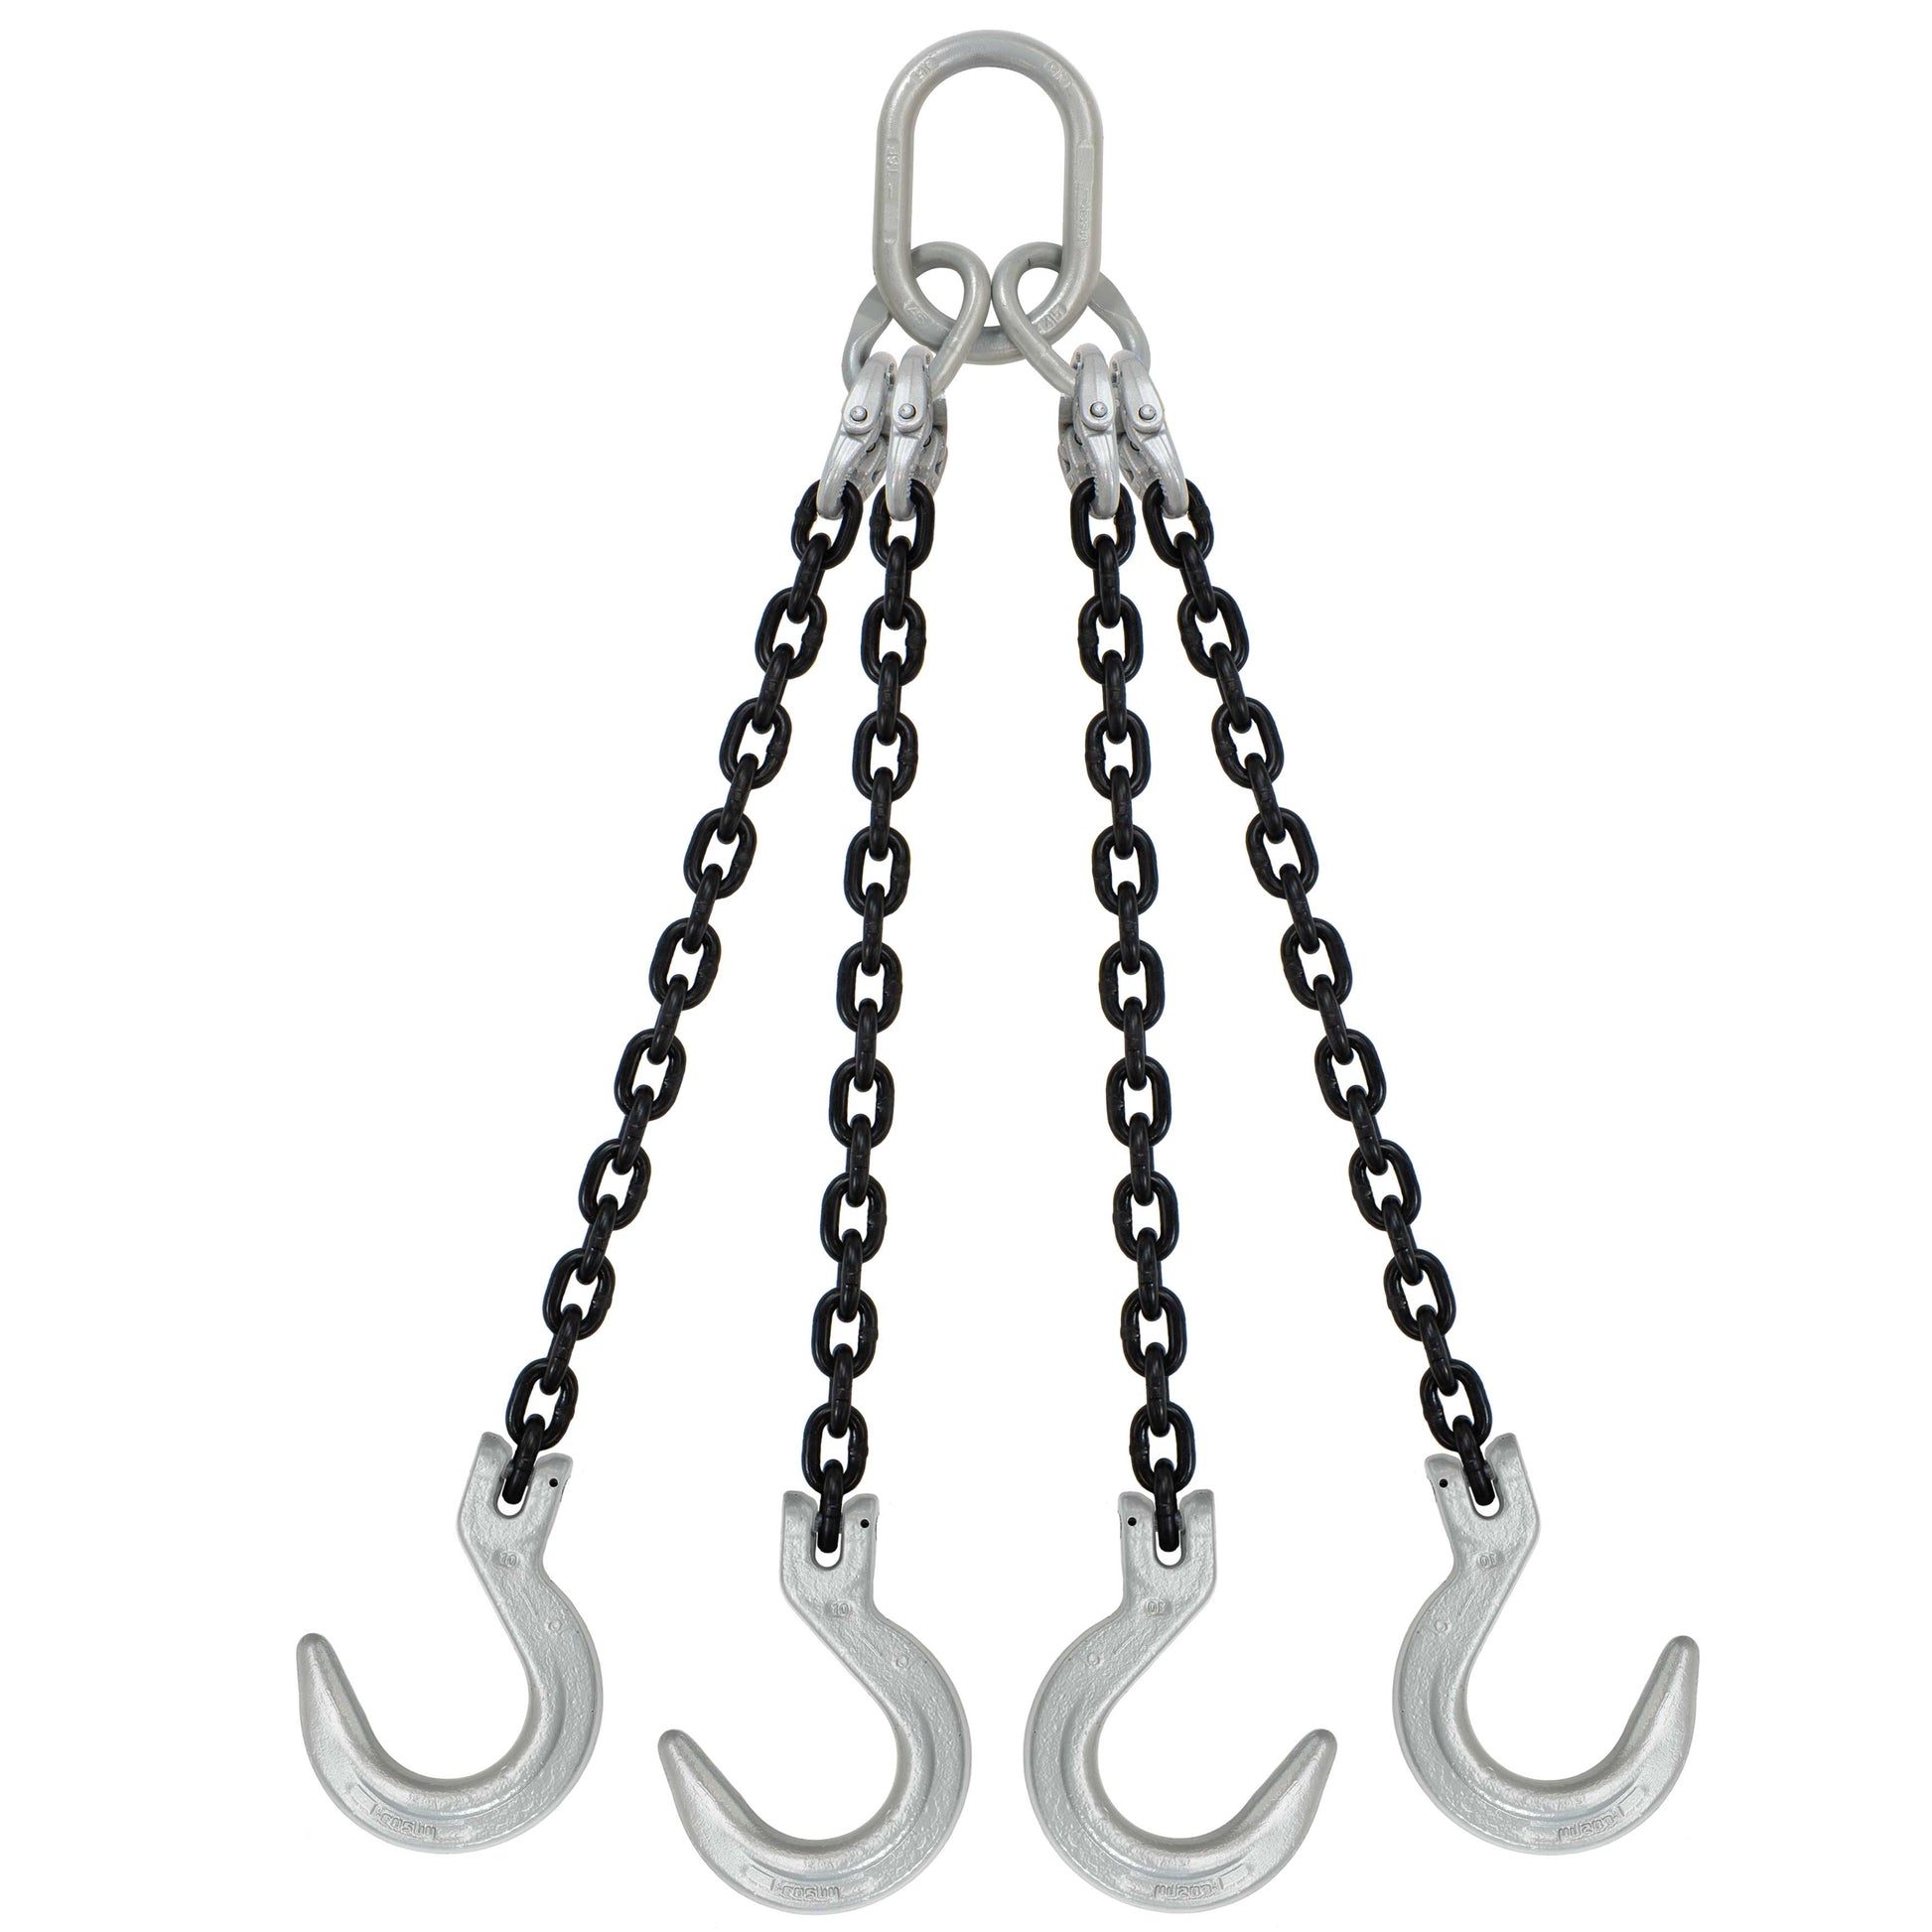 38 inch x 14 foot Domestic 4 Leg Chain Sling w Crosby Foundry Hooks Grade 100 image 1 of 2